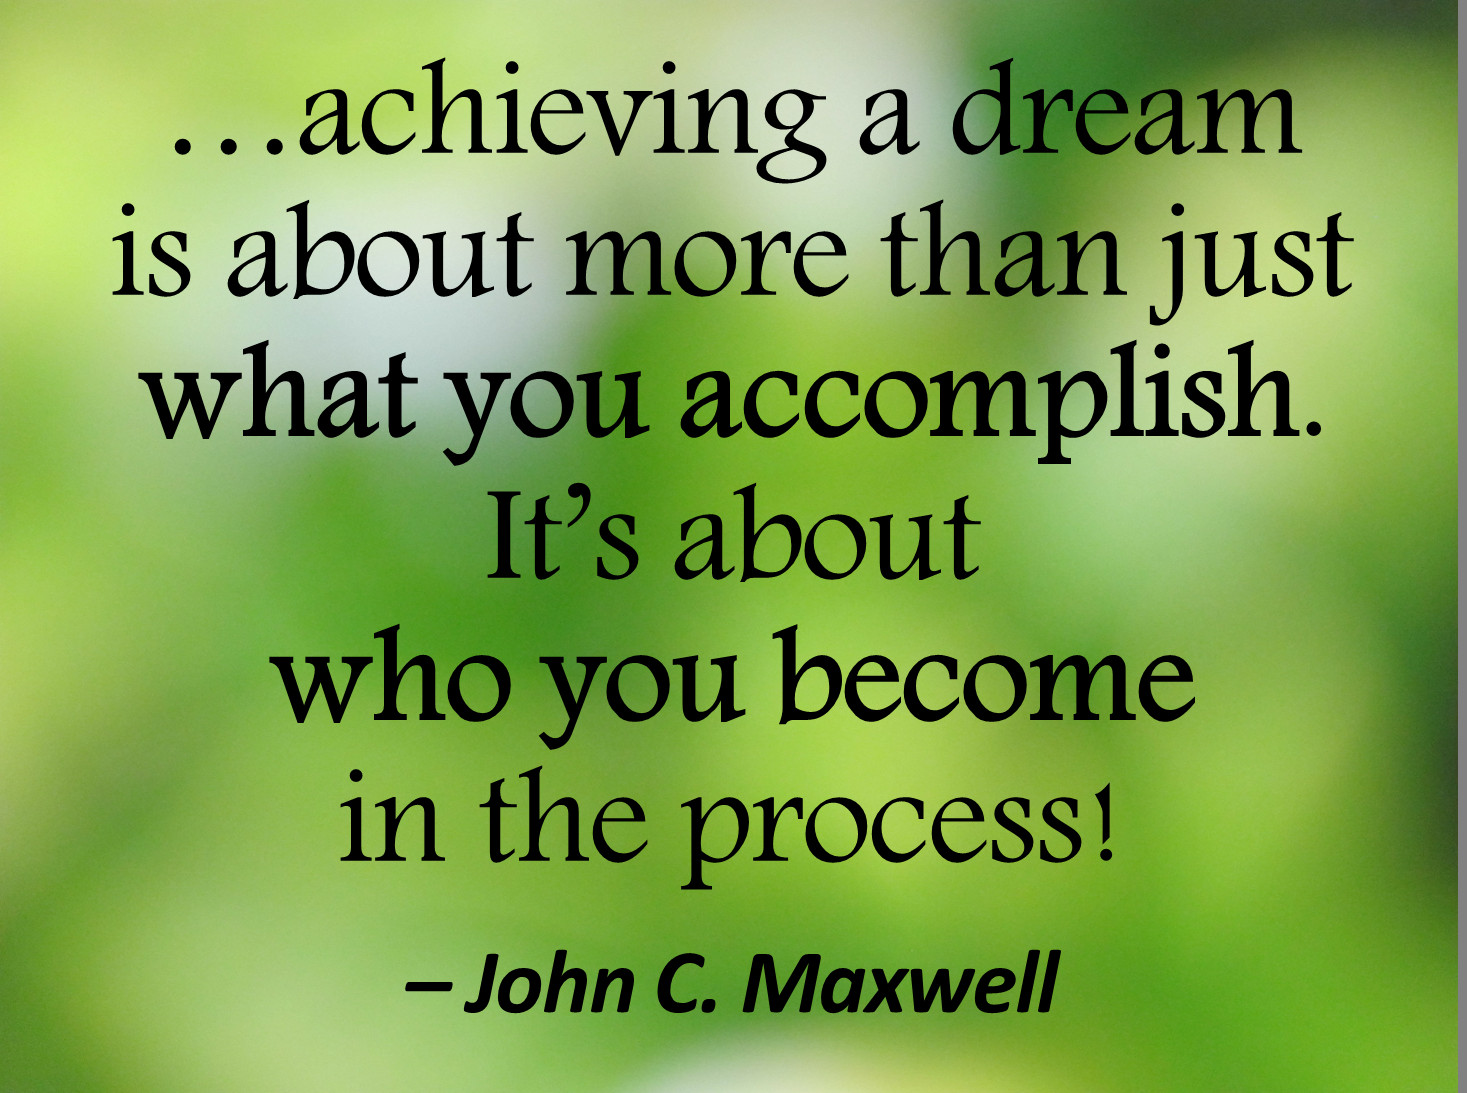 John C Maxwell Leadership Quotes
 Do the work and keep showing up